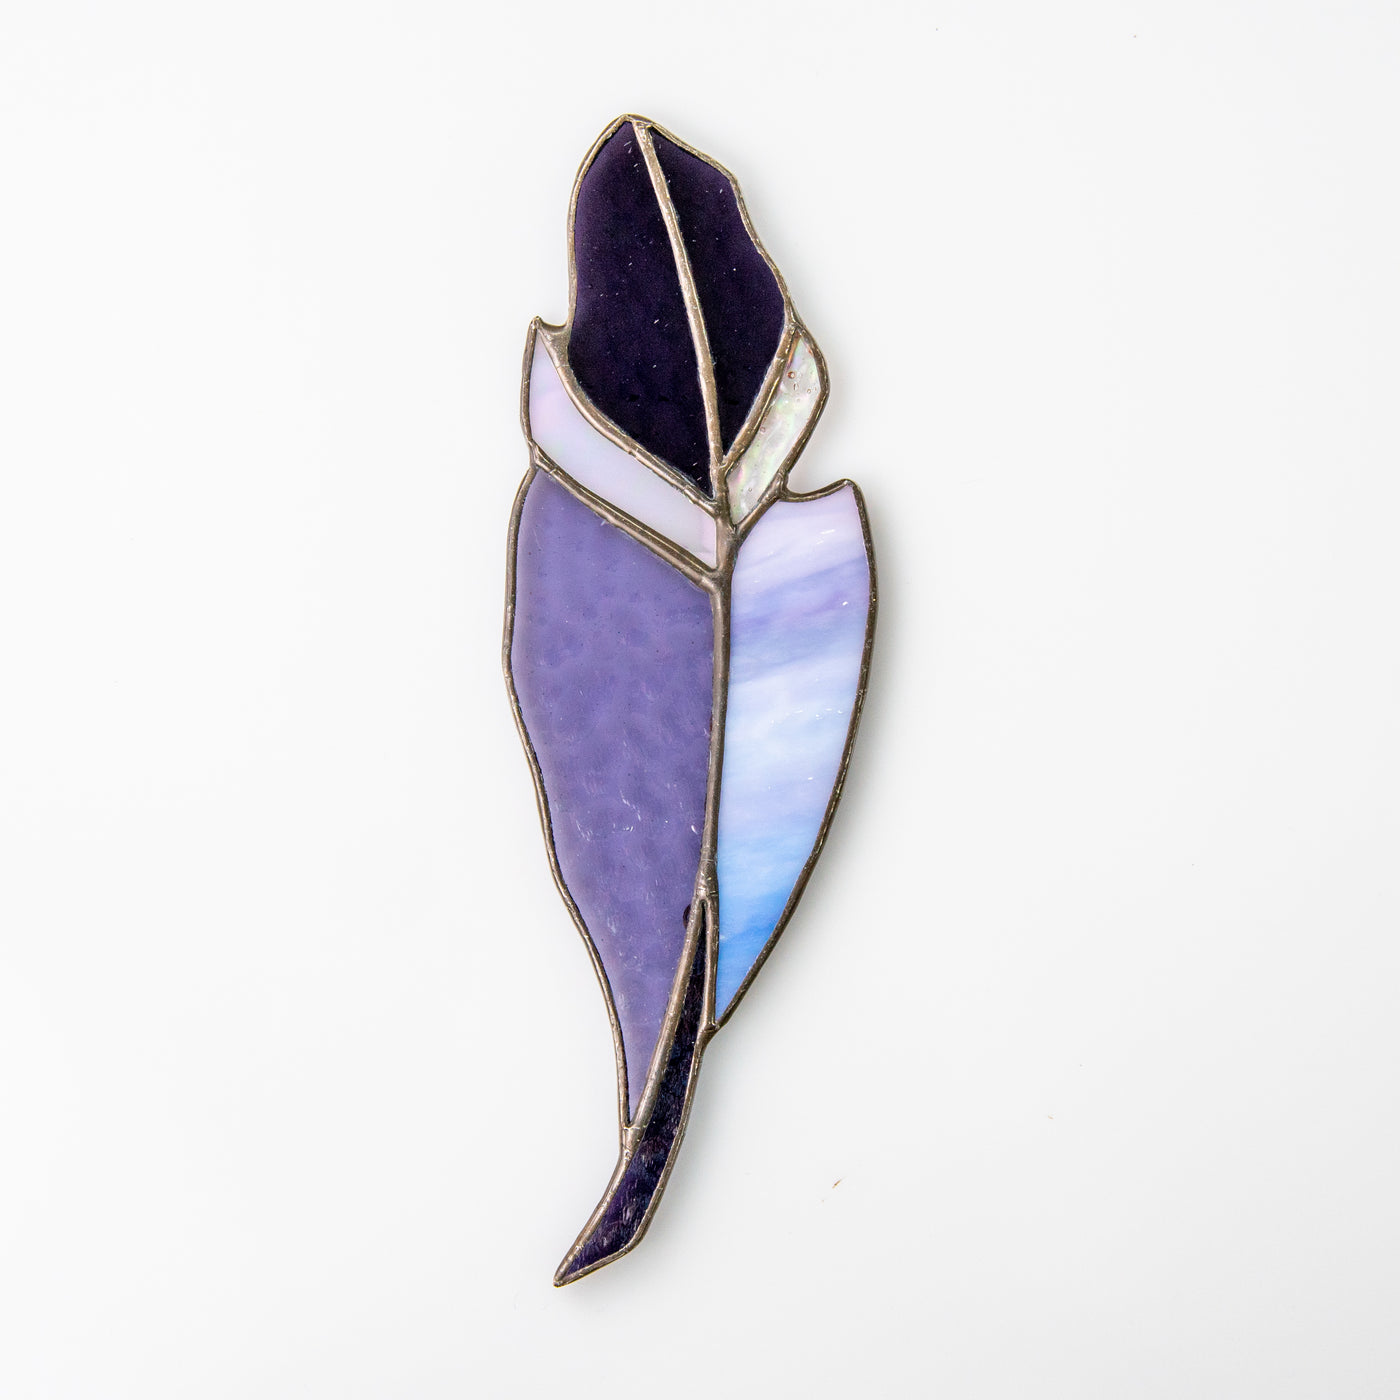 Purple stained glass feather suncatcher for home window decor